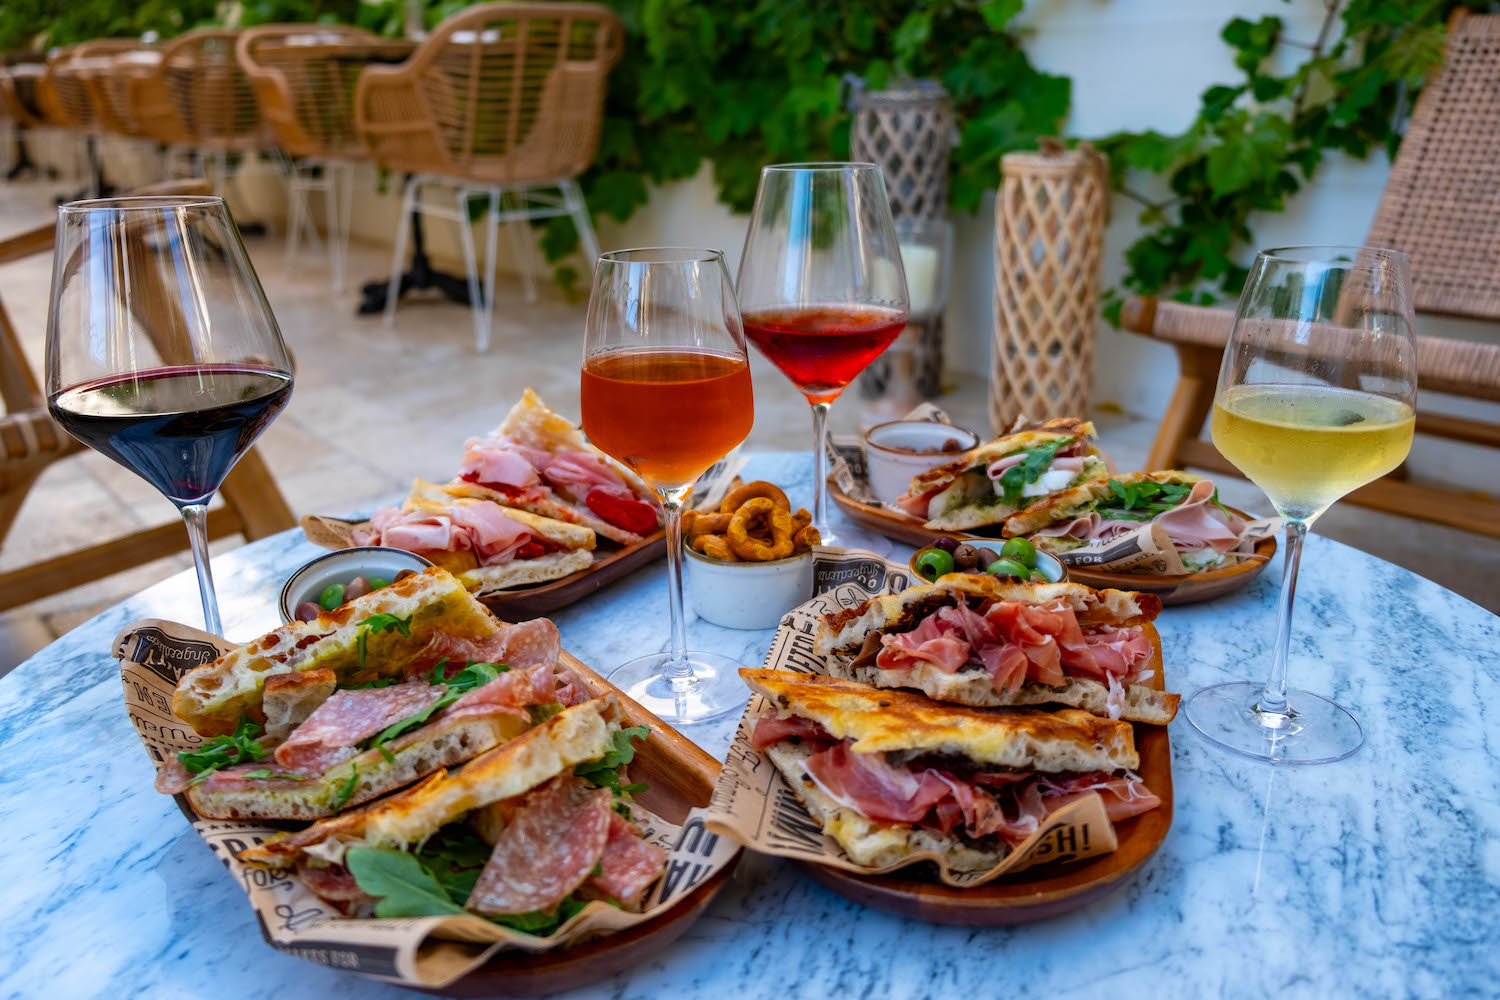 Spread of wine and sandwiches on a table